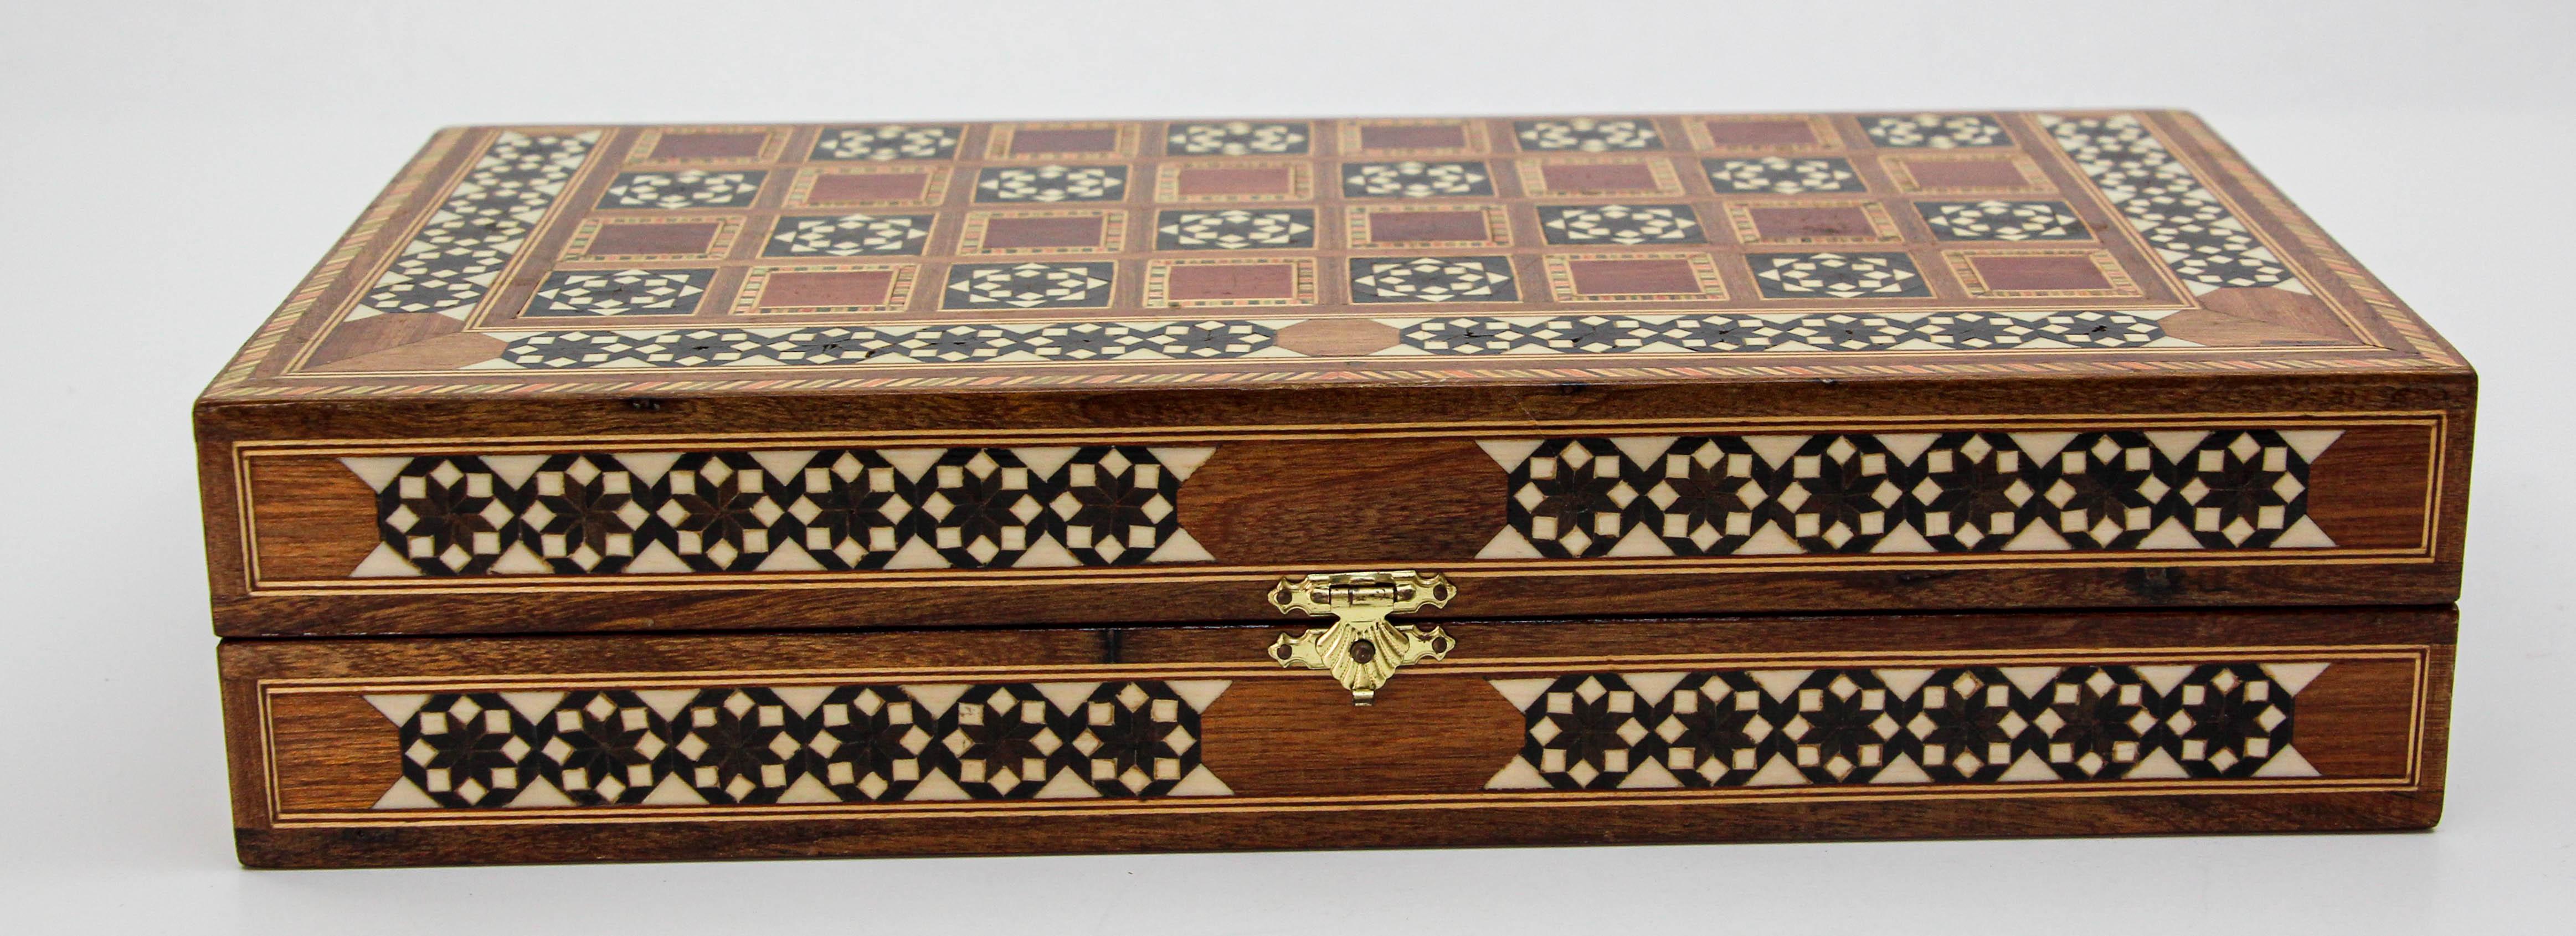 Middle Eastern Mosaic Wooden Inlaid Marquetry Box Game Backgammon 1